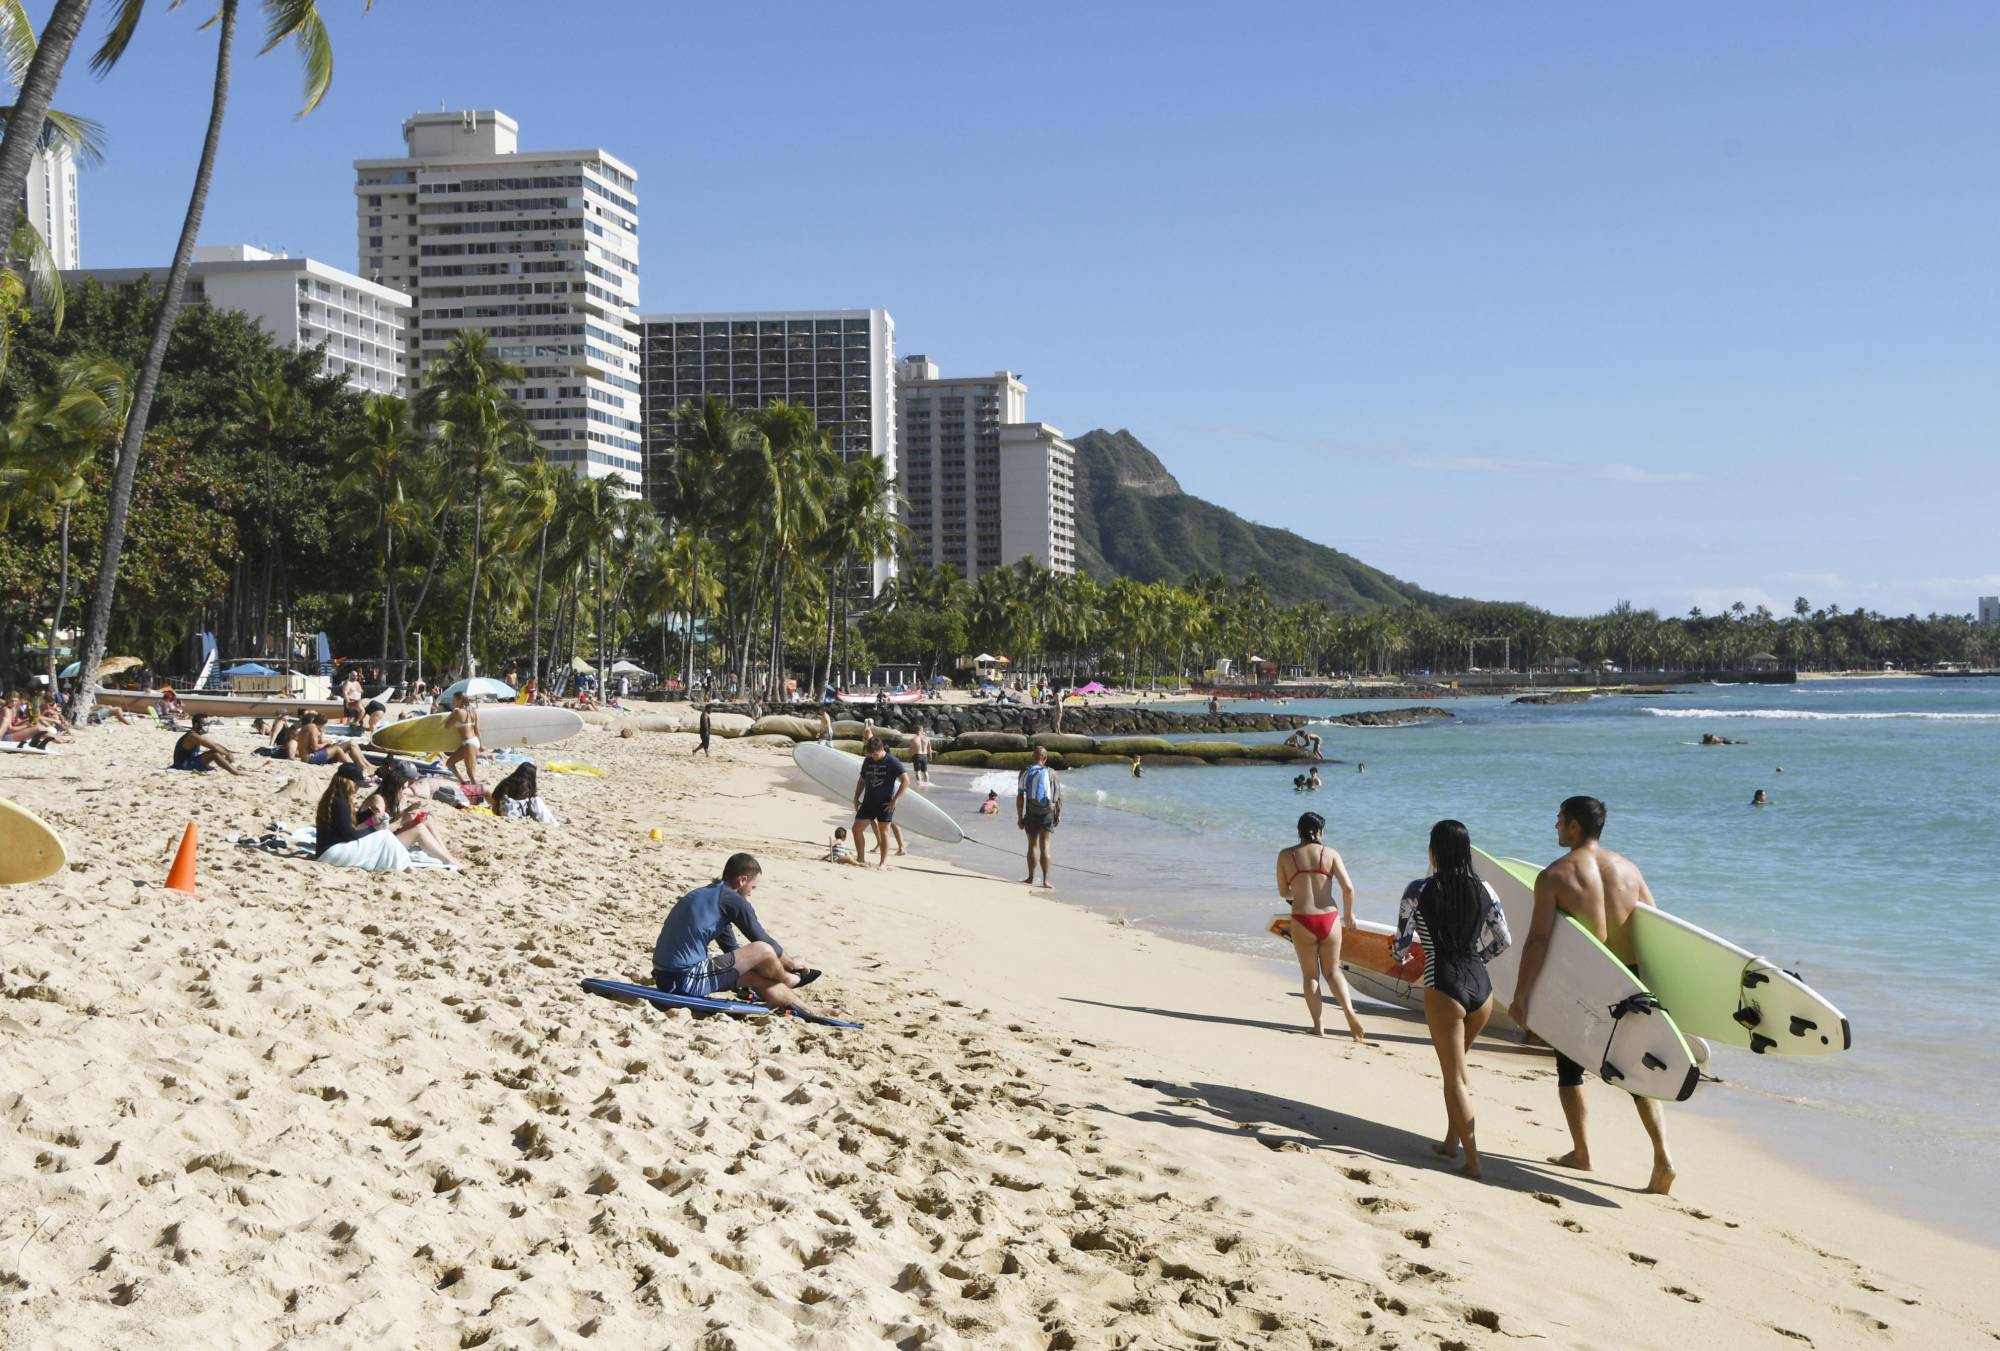 Why Japnese Loves Hawaii Tourism?